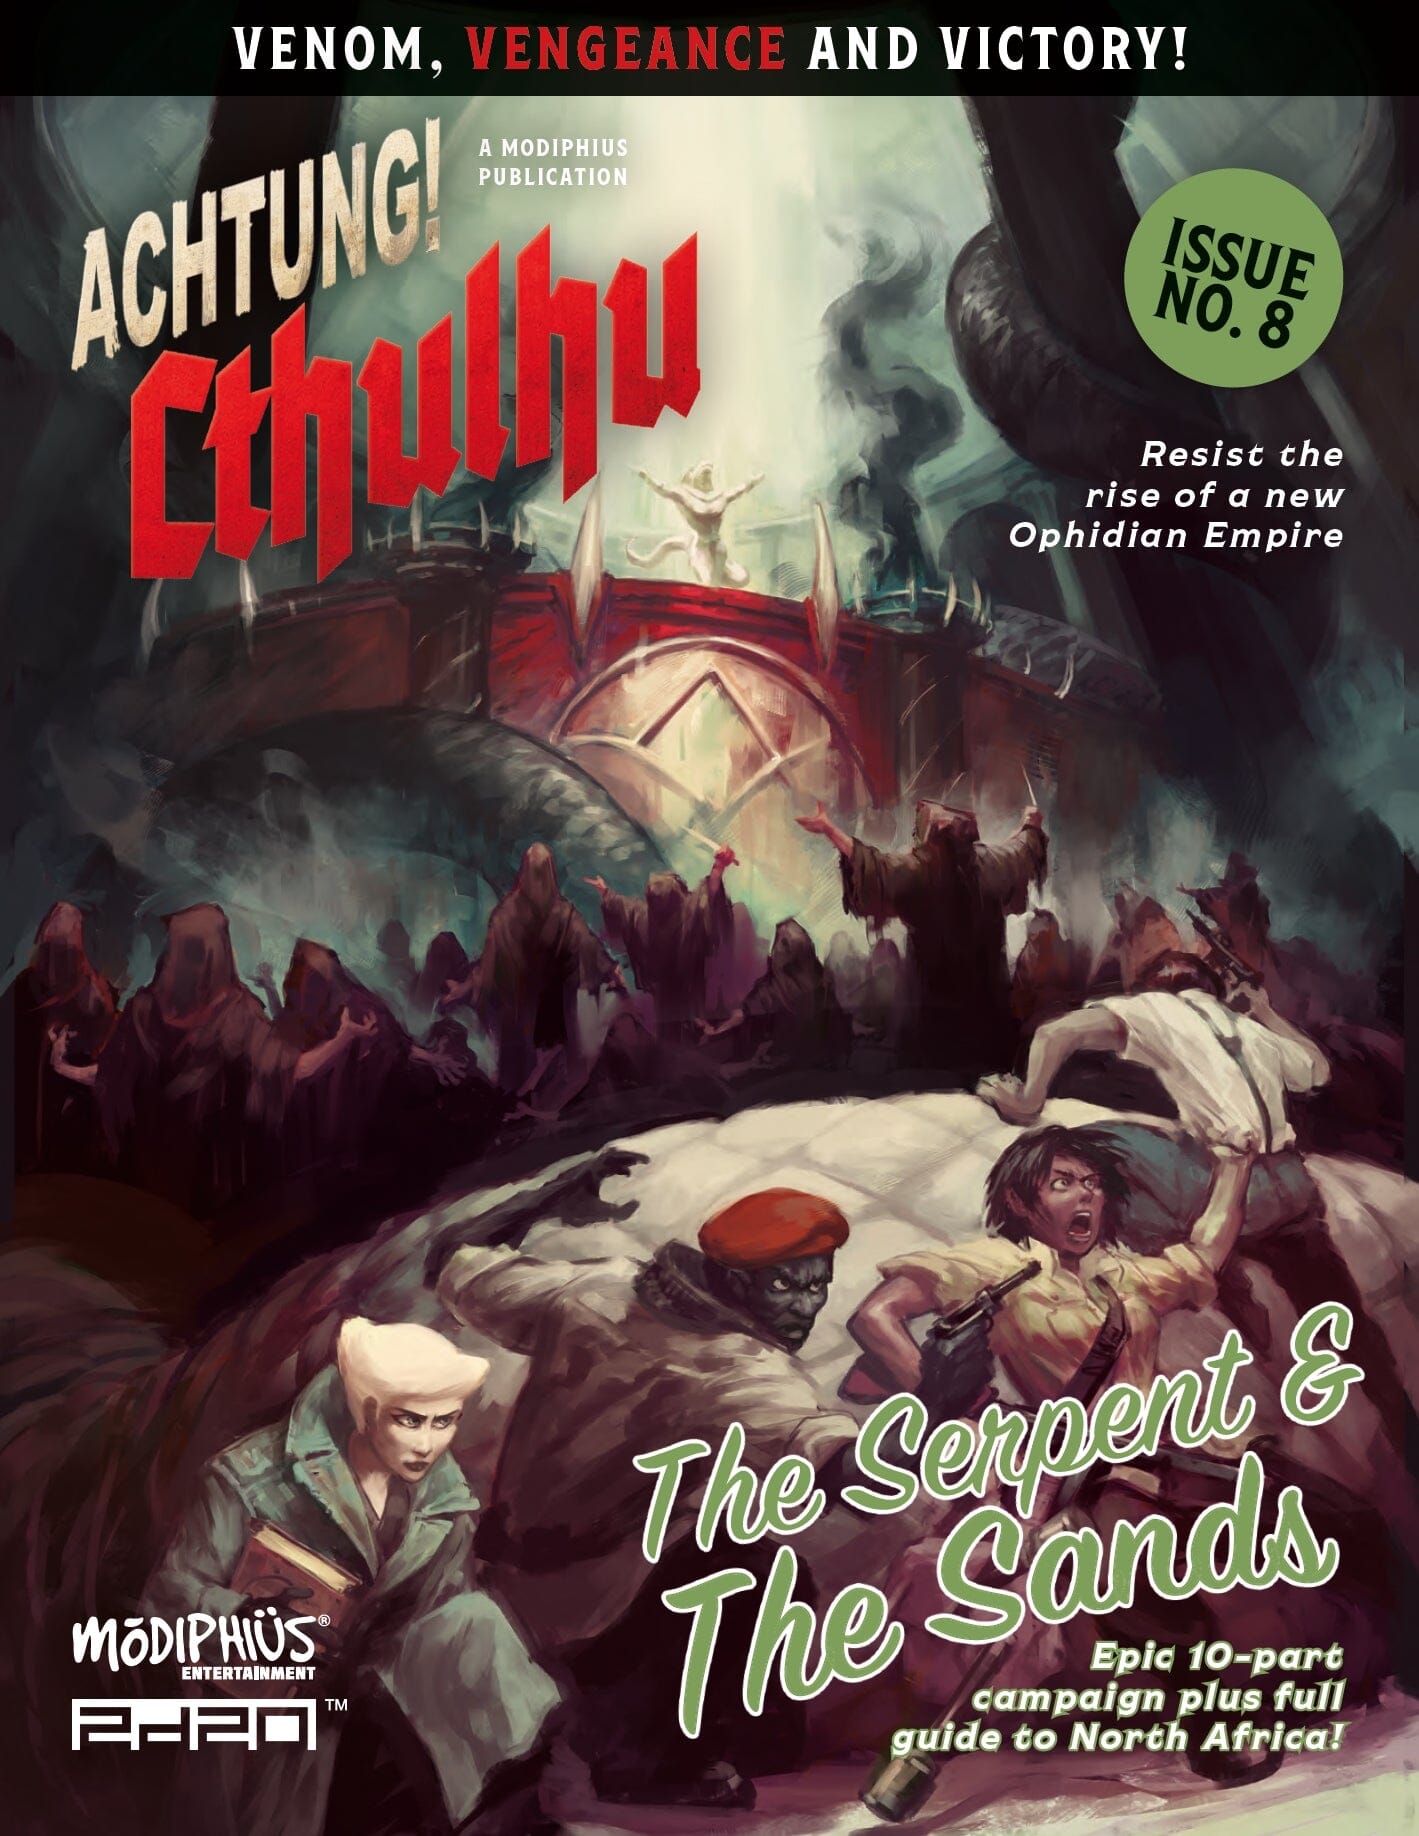 Achtung! Cthulhu 2d20: The Serpent and the Sands Achtung! Cthulhu 2d20 Modiphius Entertainment 